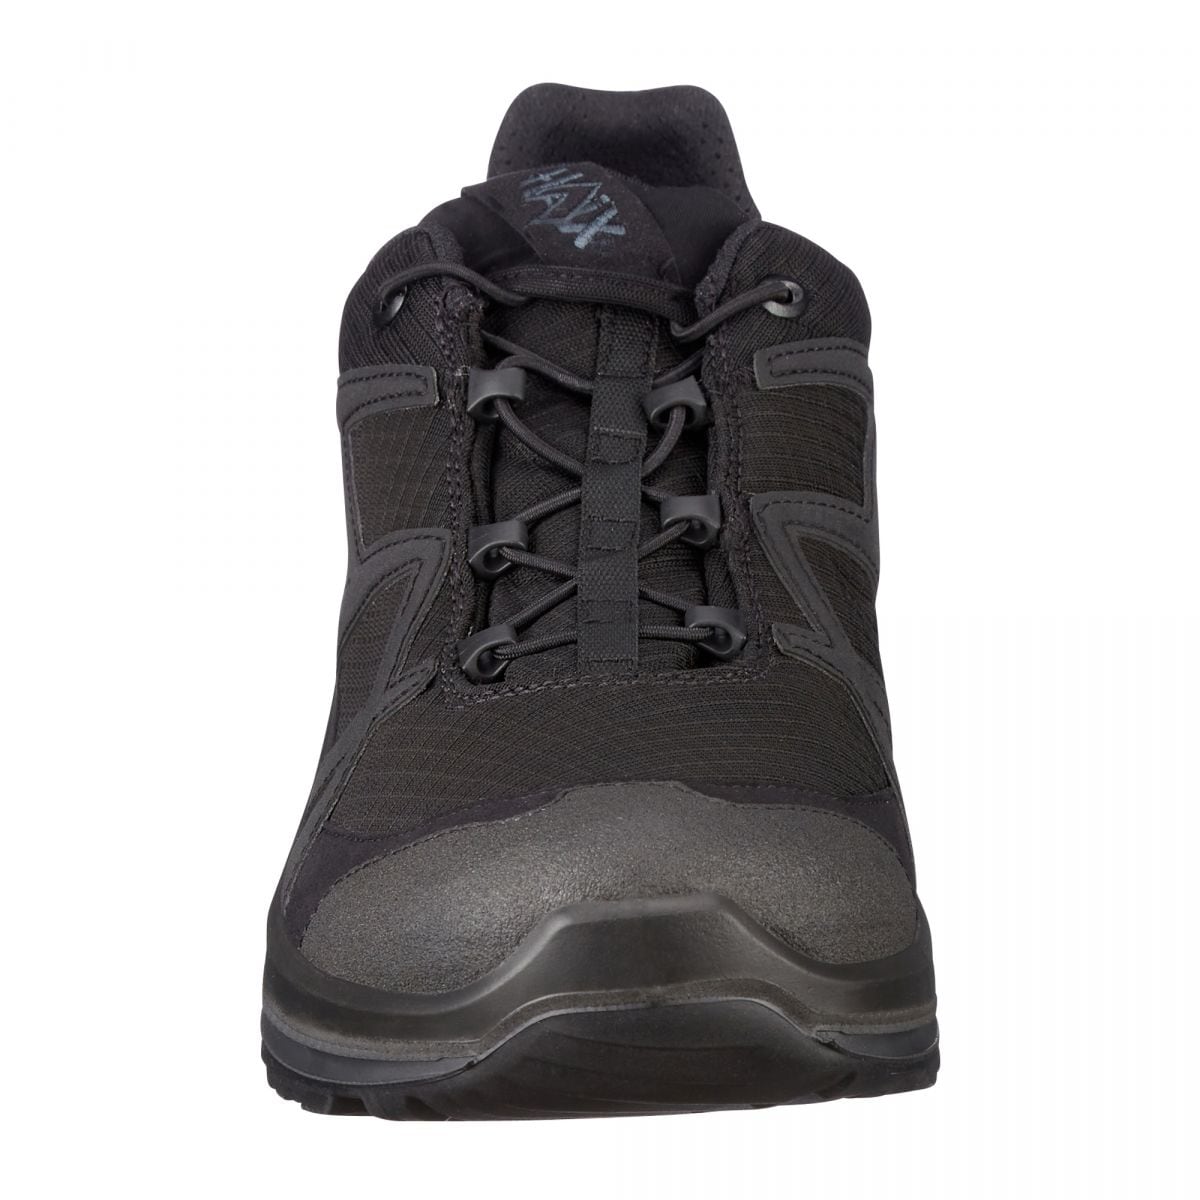 Purchase the Haix Tactical Shoe Black Eagle Athletic 2.1 GTX Low